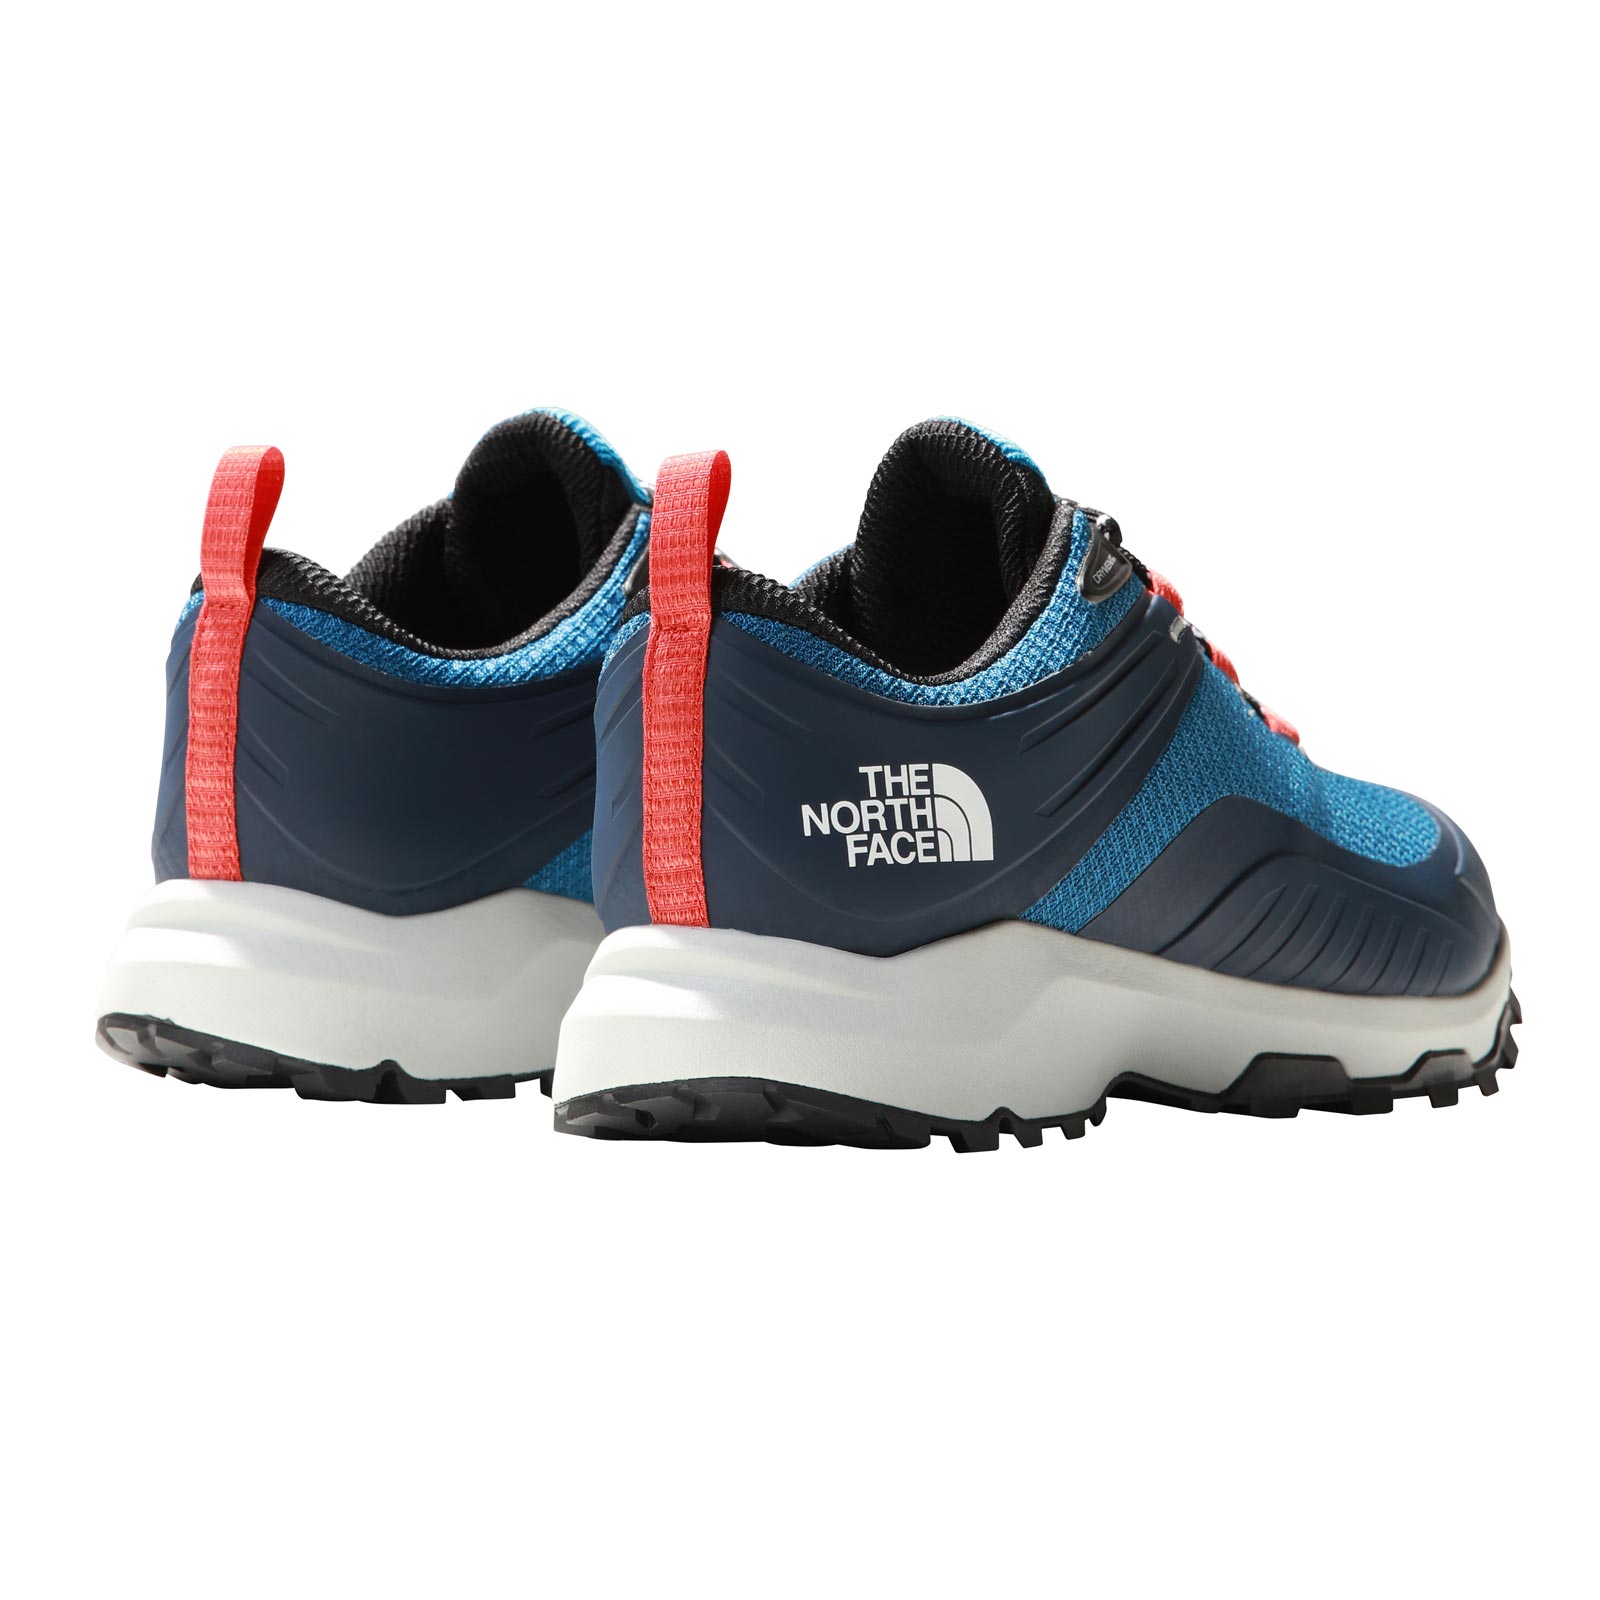 THE NORTH FACE CRAGMONT WOMENS WATERPROOF HIKING SHOES